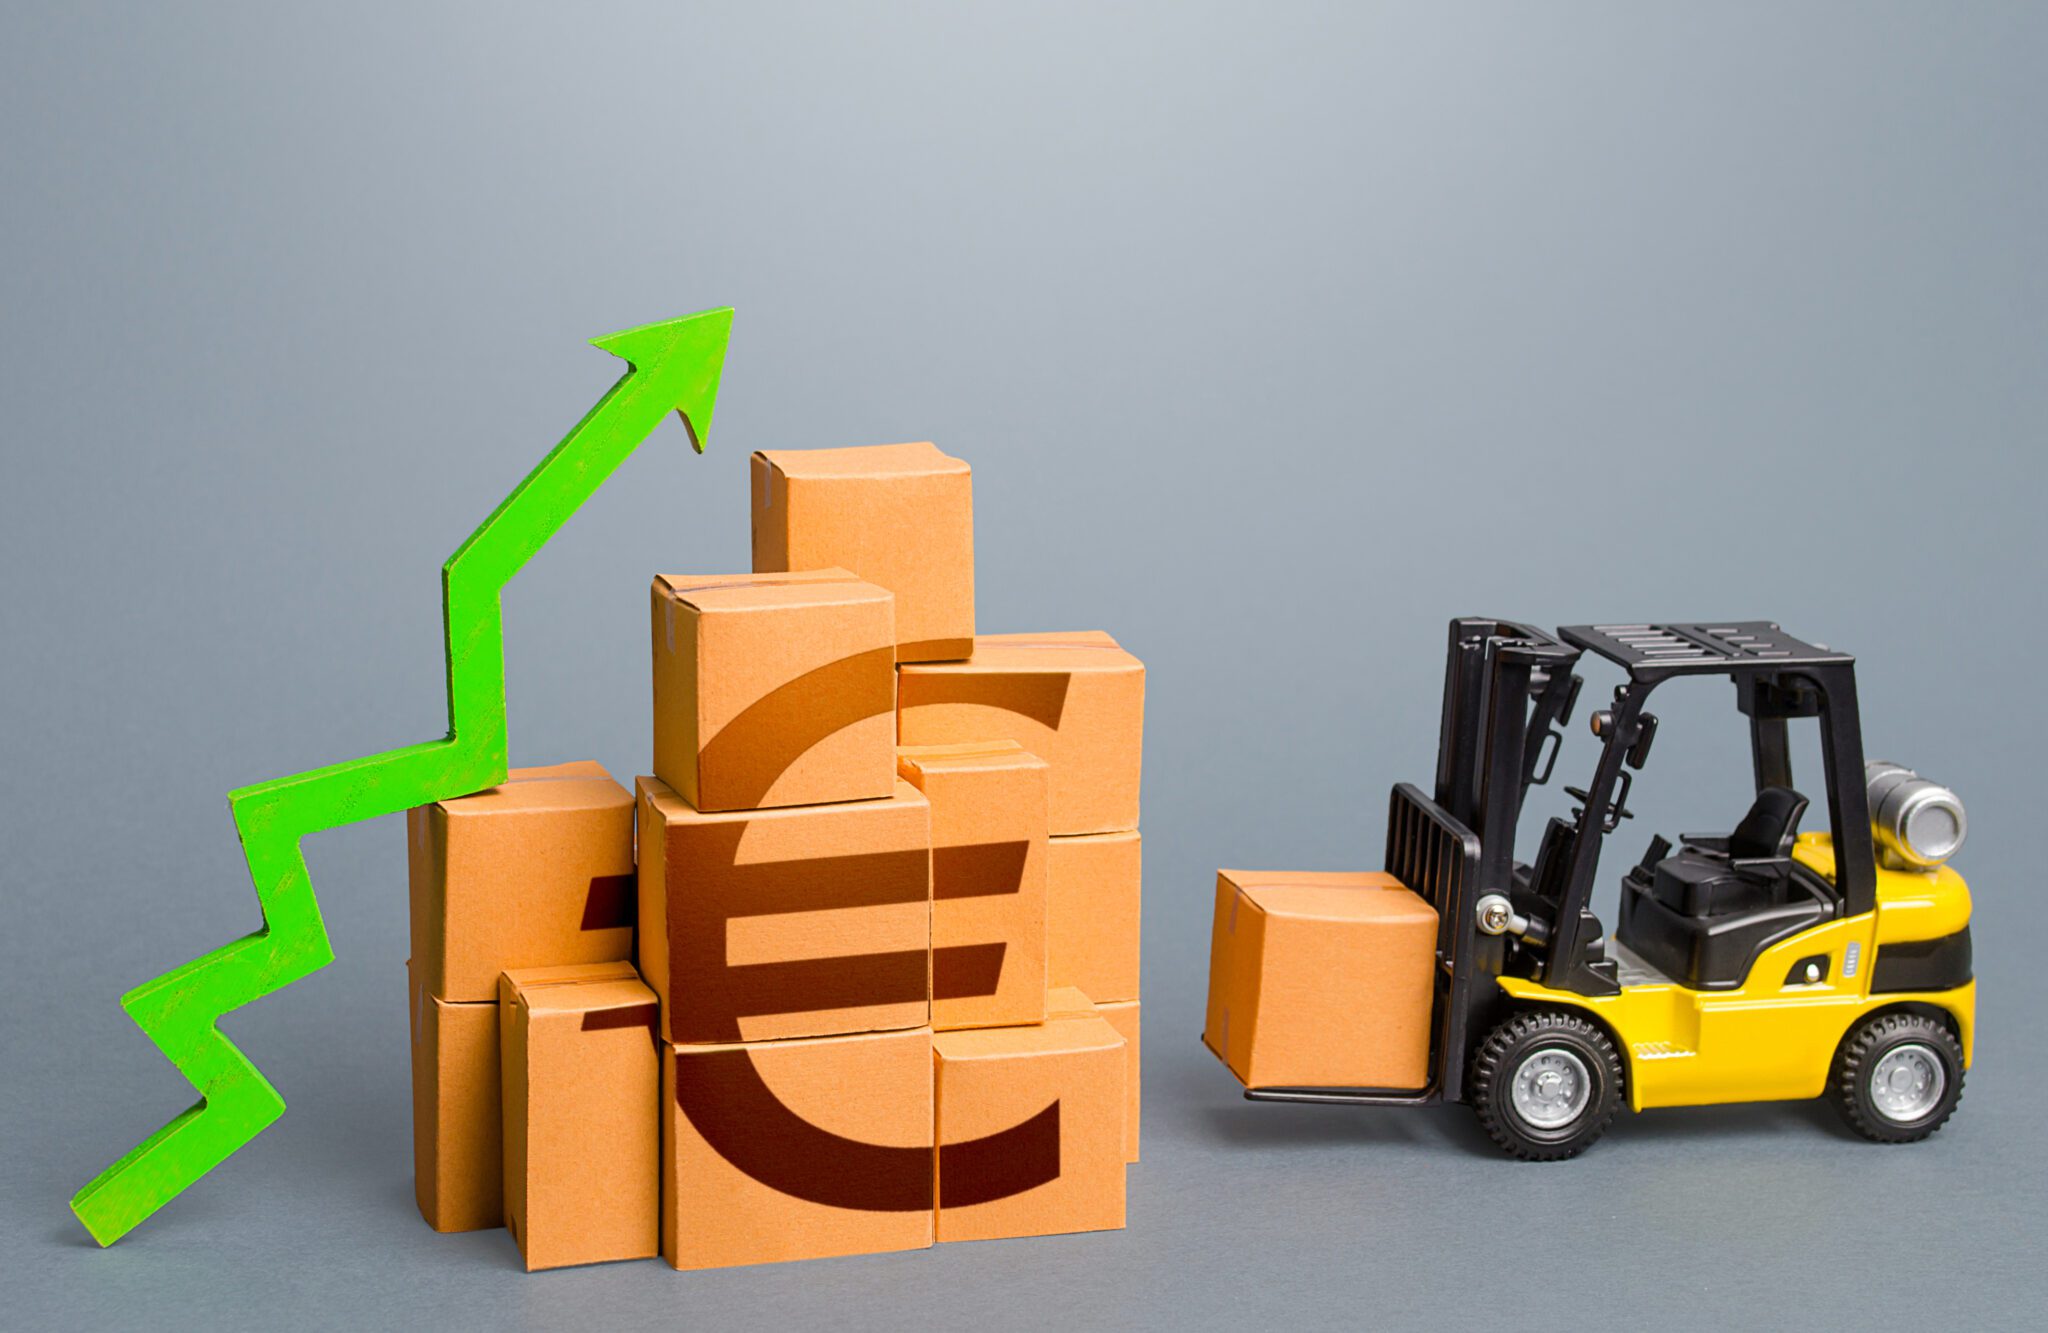 Forklift and stack of boxes with euro symbol and green up arrow. Sales growth concept.